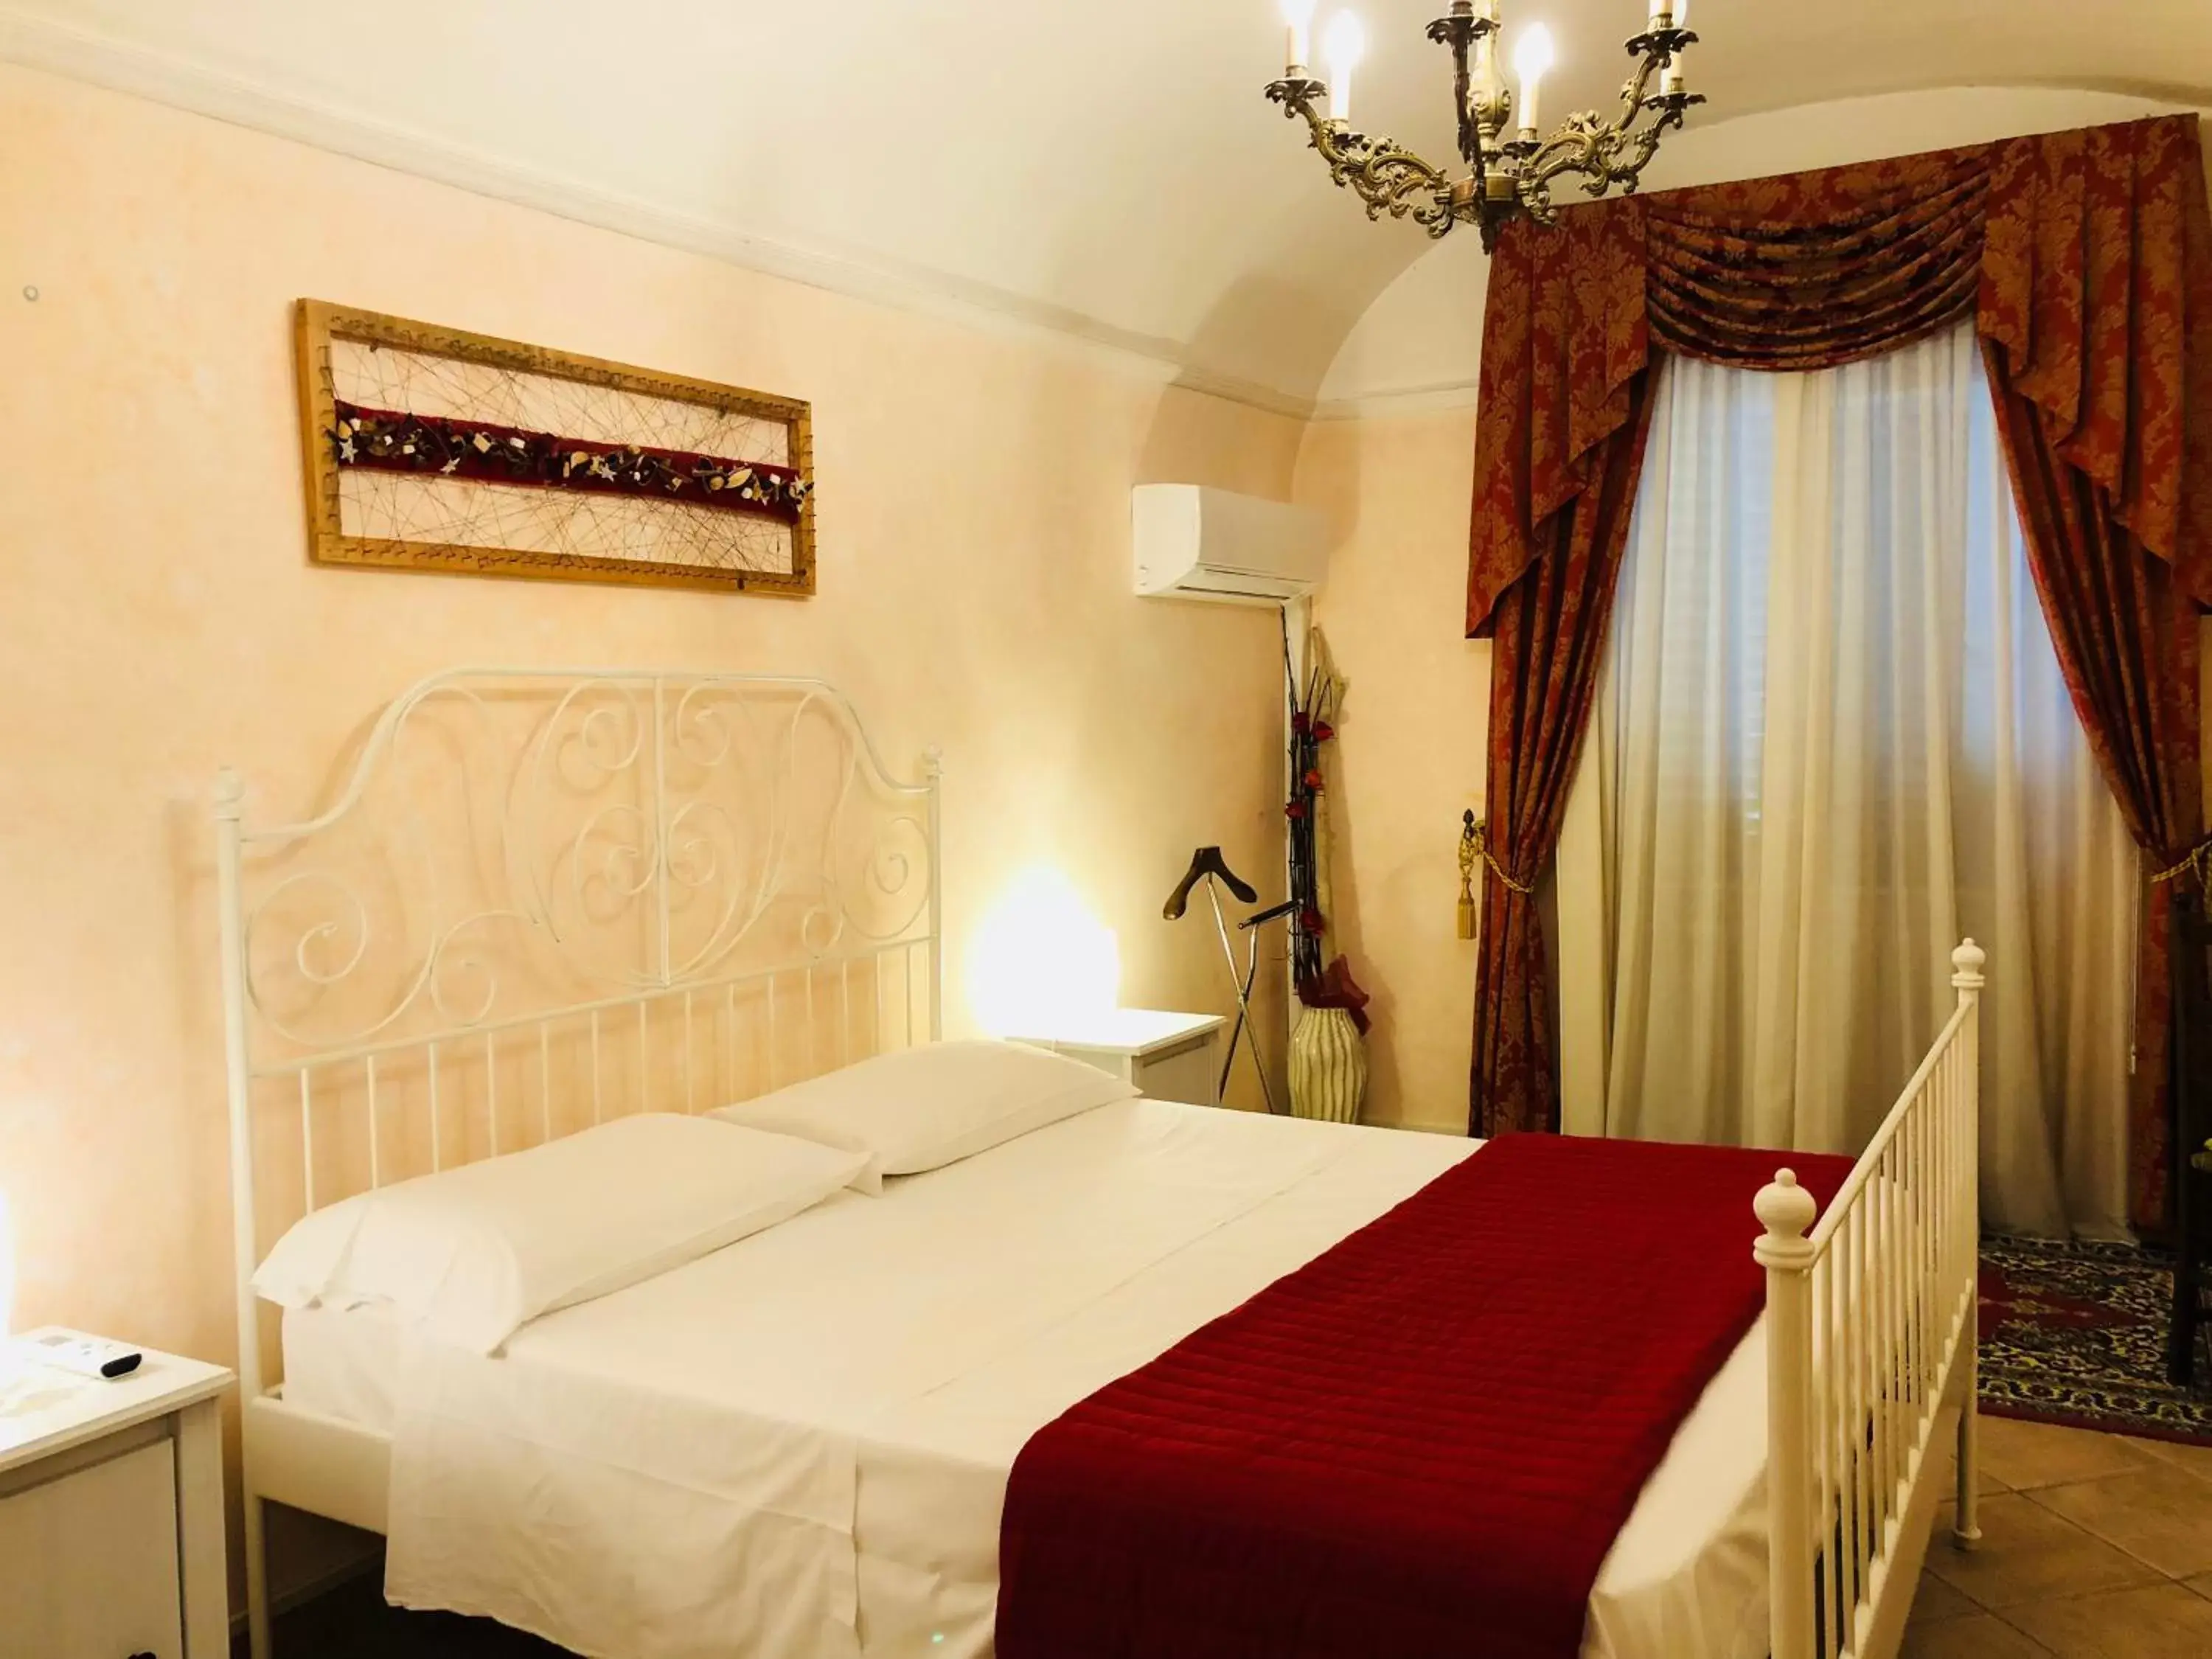 Double Room with Private External Bathroom in Villa Berghella